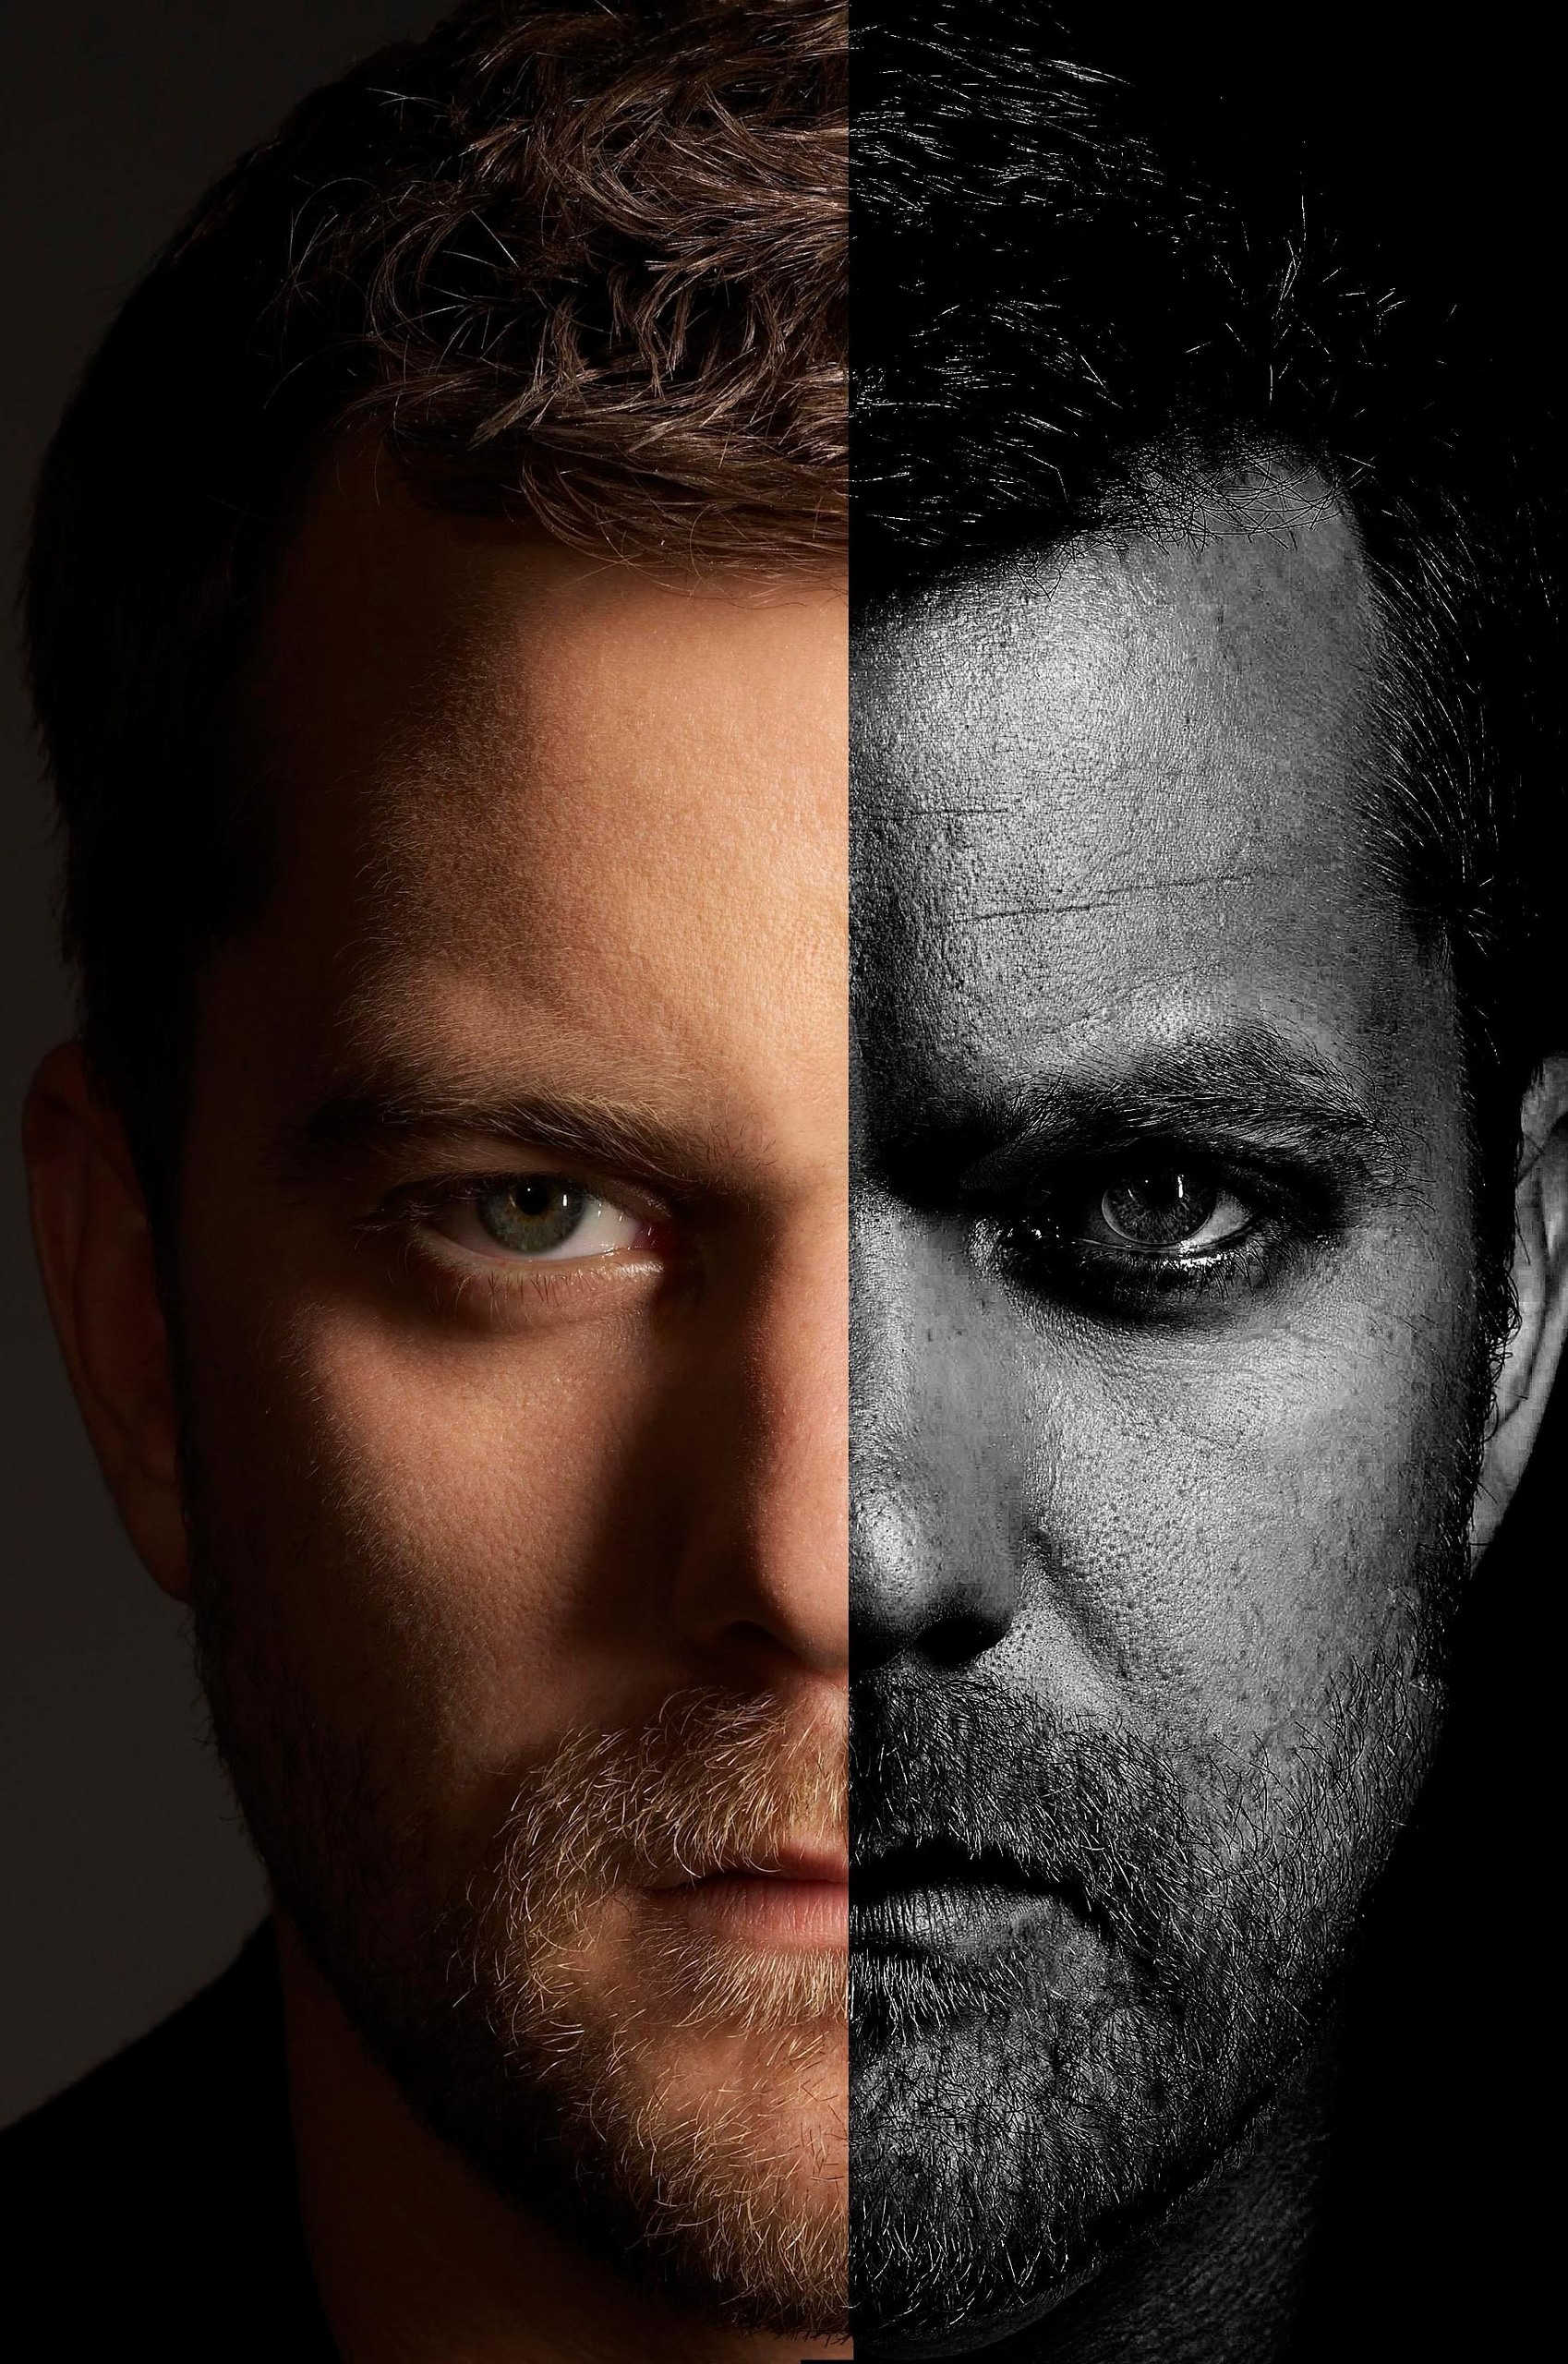 To The Joshua Jackson Wallpaper Just Right Click On